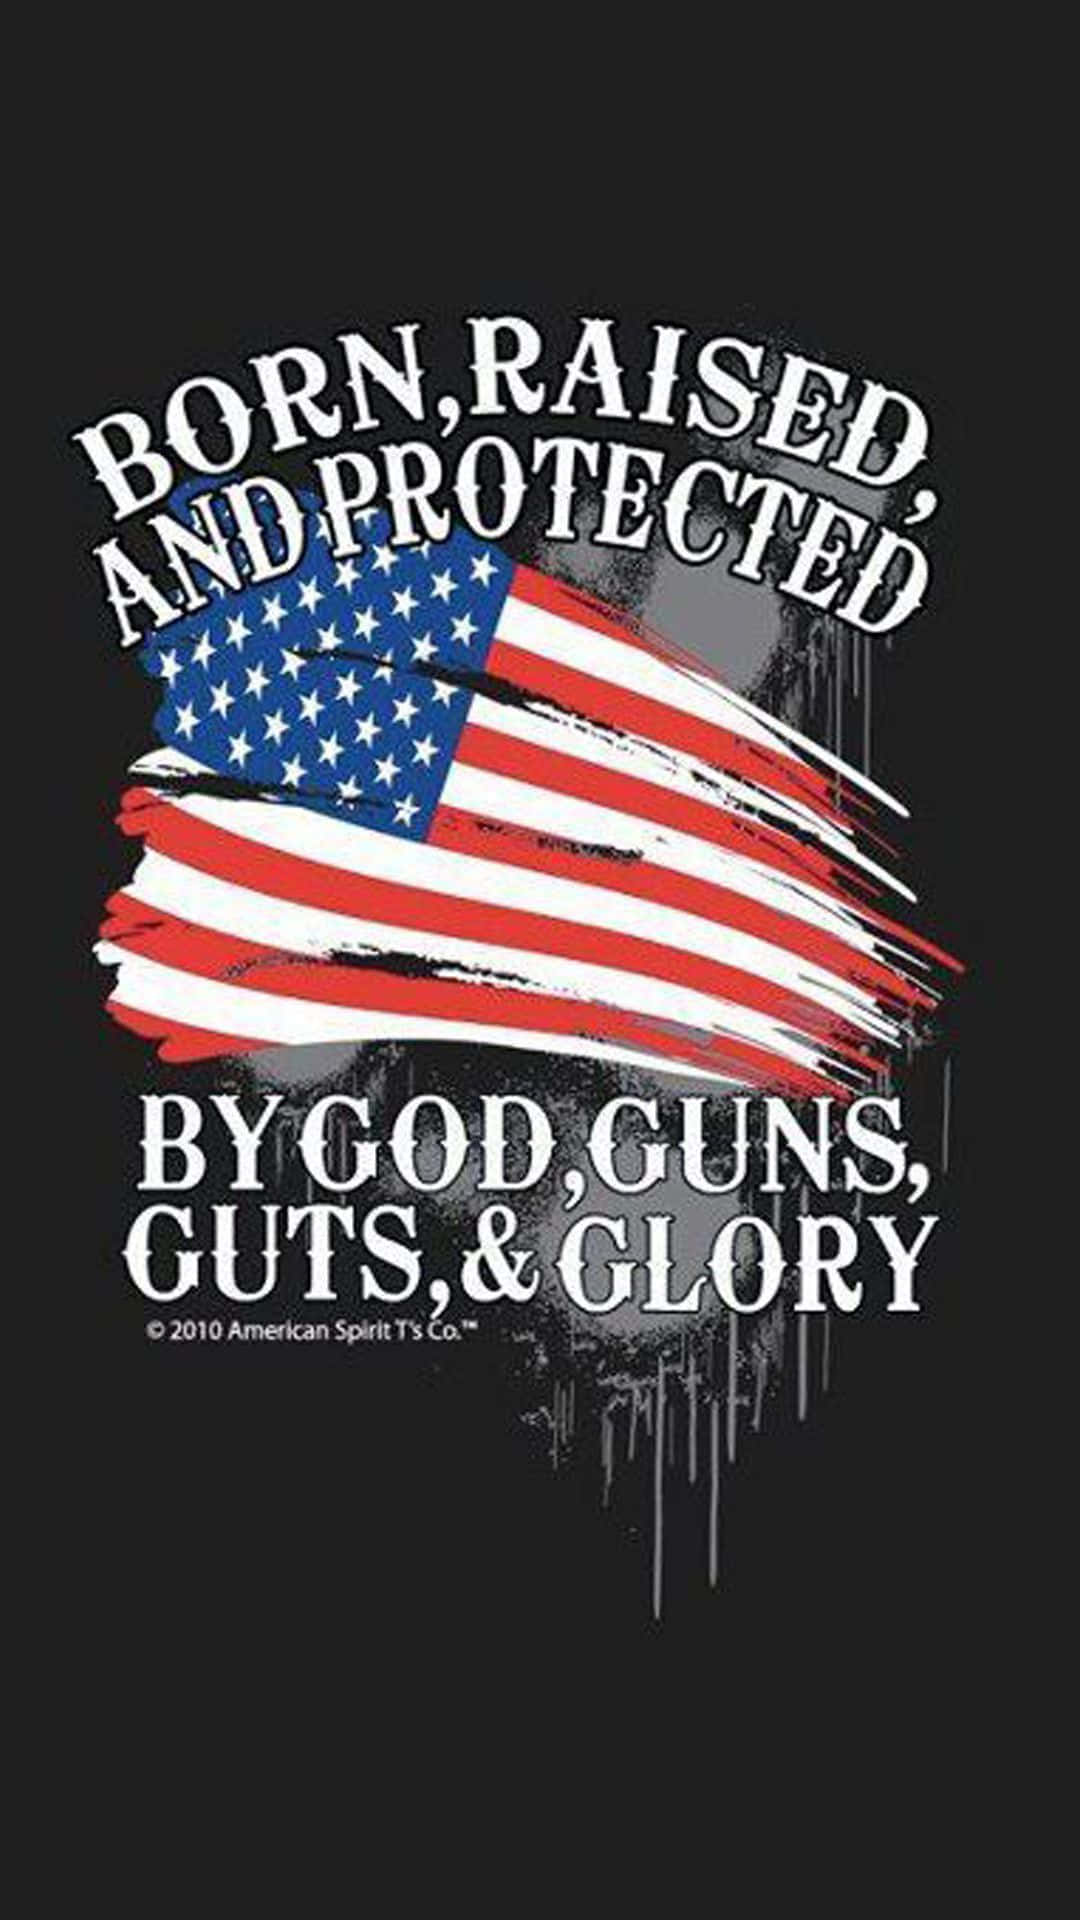 Born, Raised And Protected By God Guns, Guts And Glory T Shirt Background